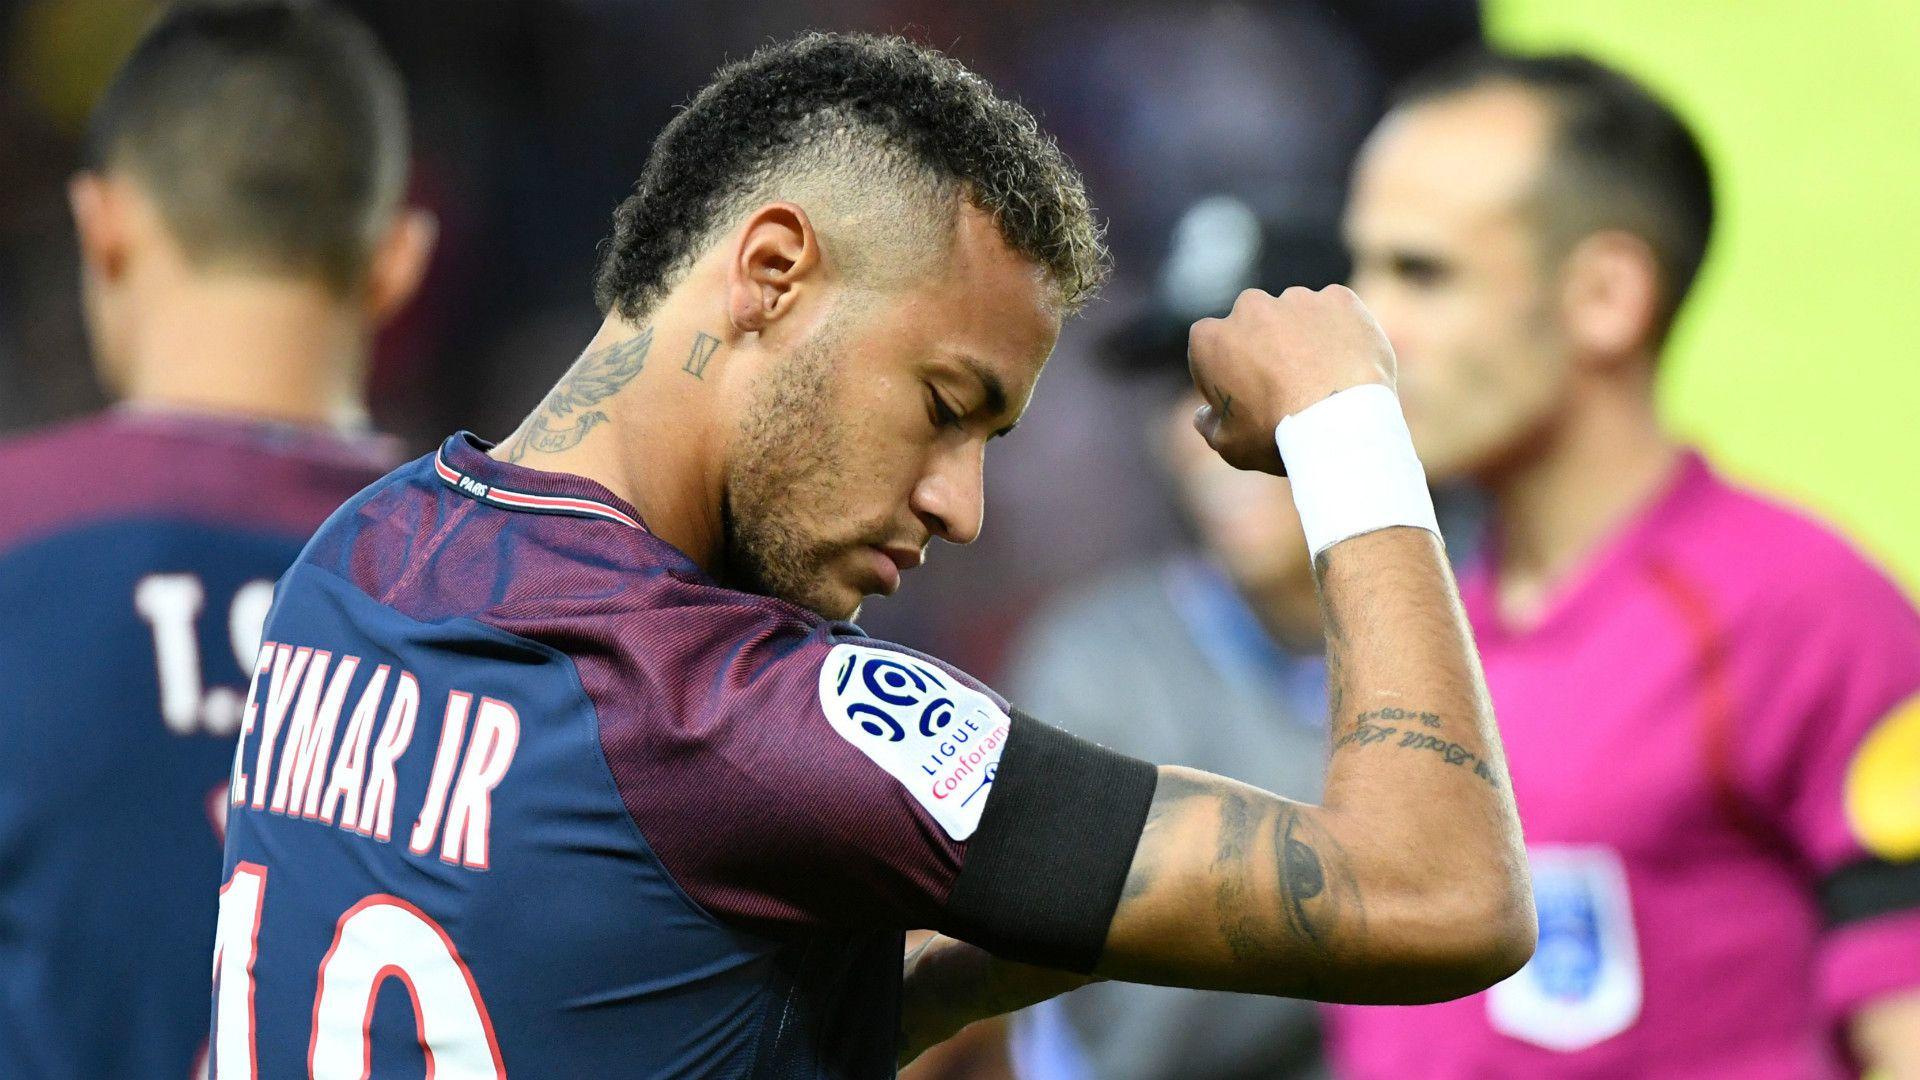 Uefa open investigation into PSG after Neymar and Kylian Mbappe